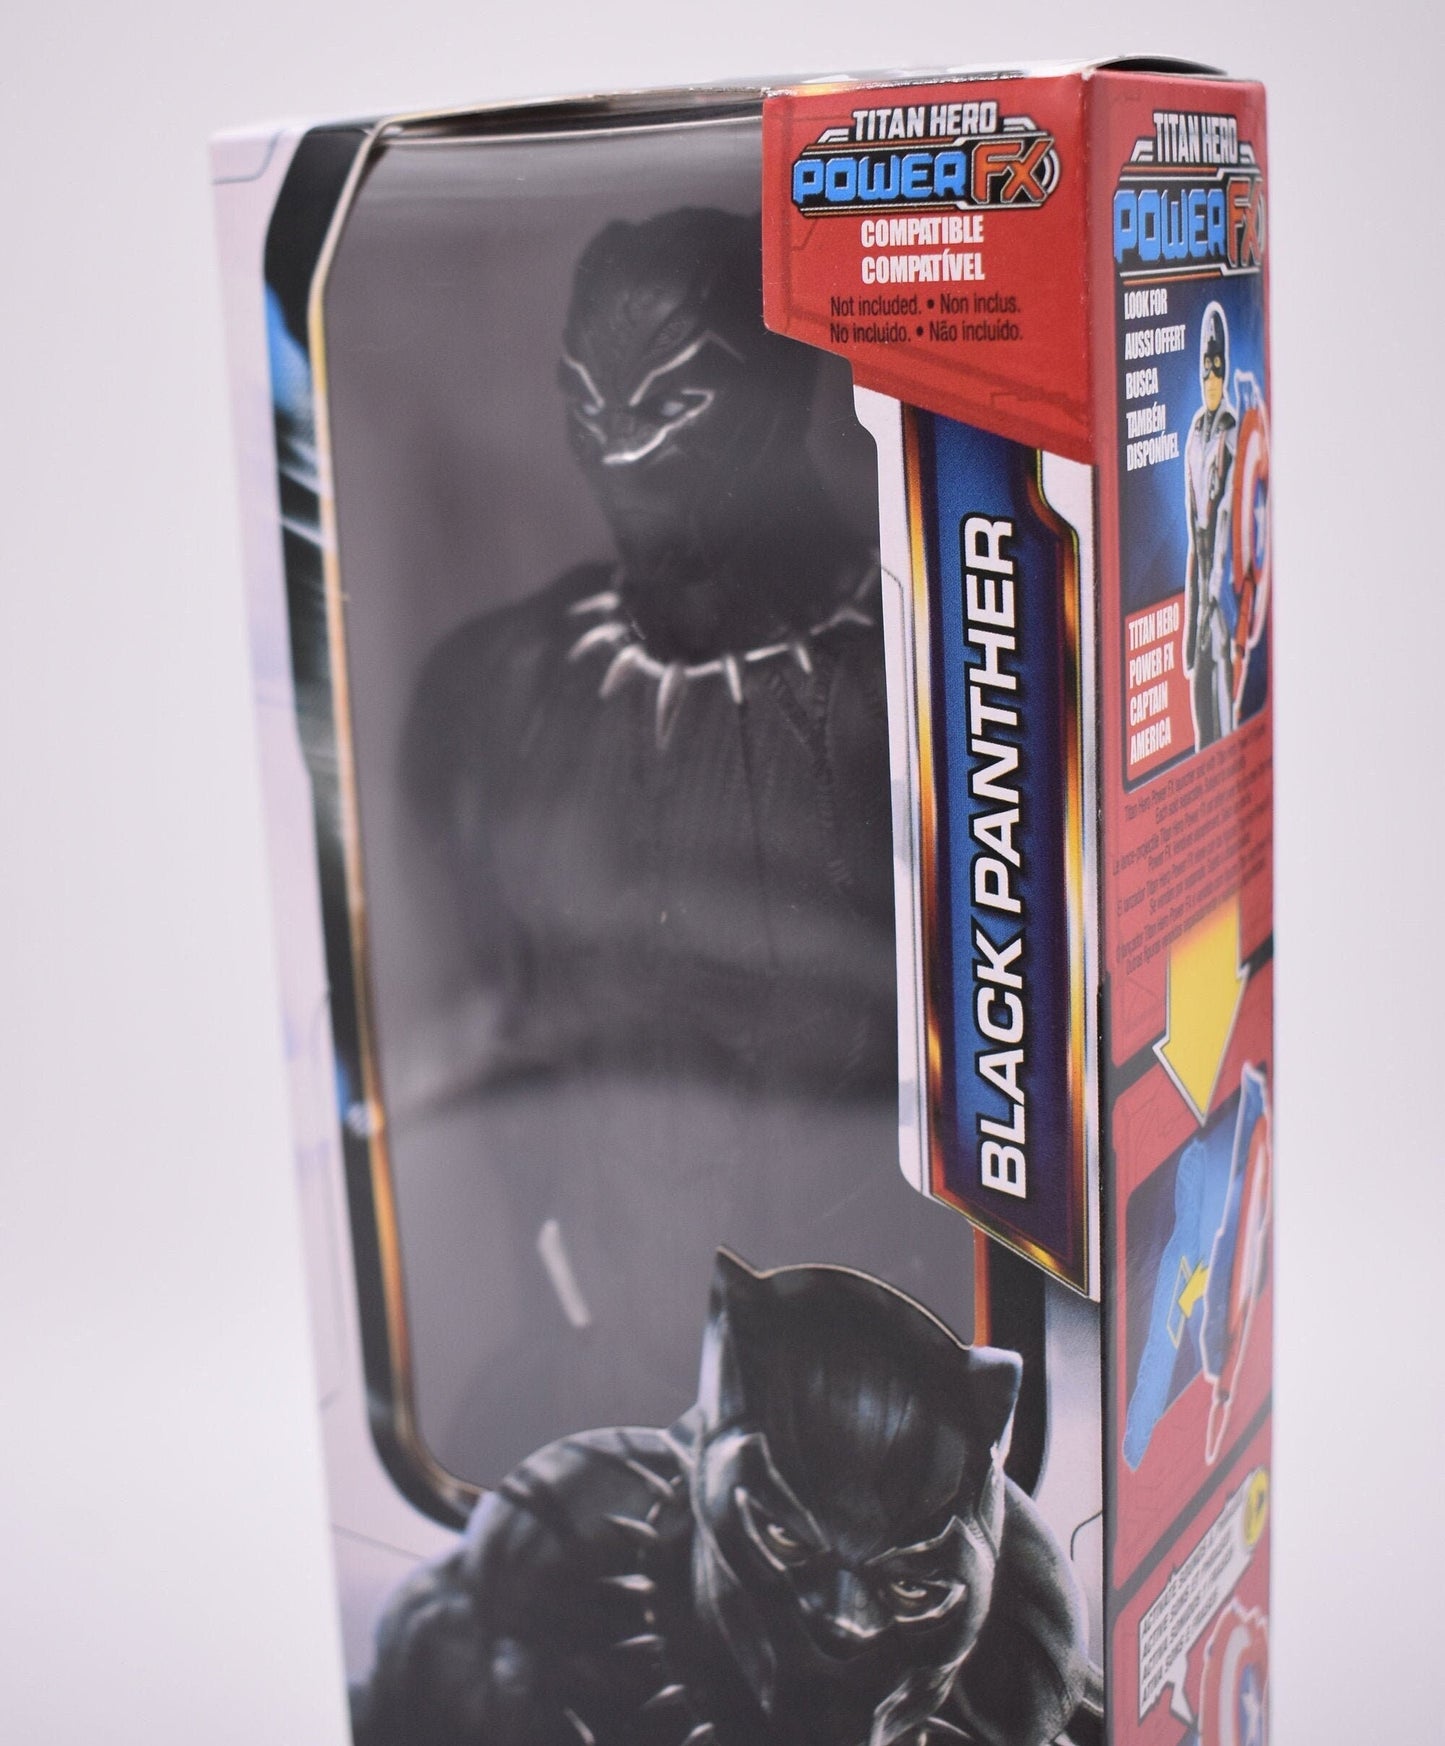 Black Panther Action Figure